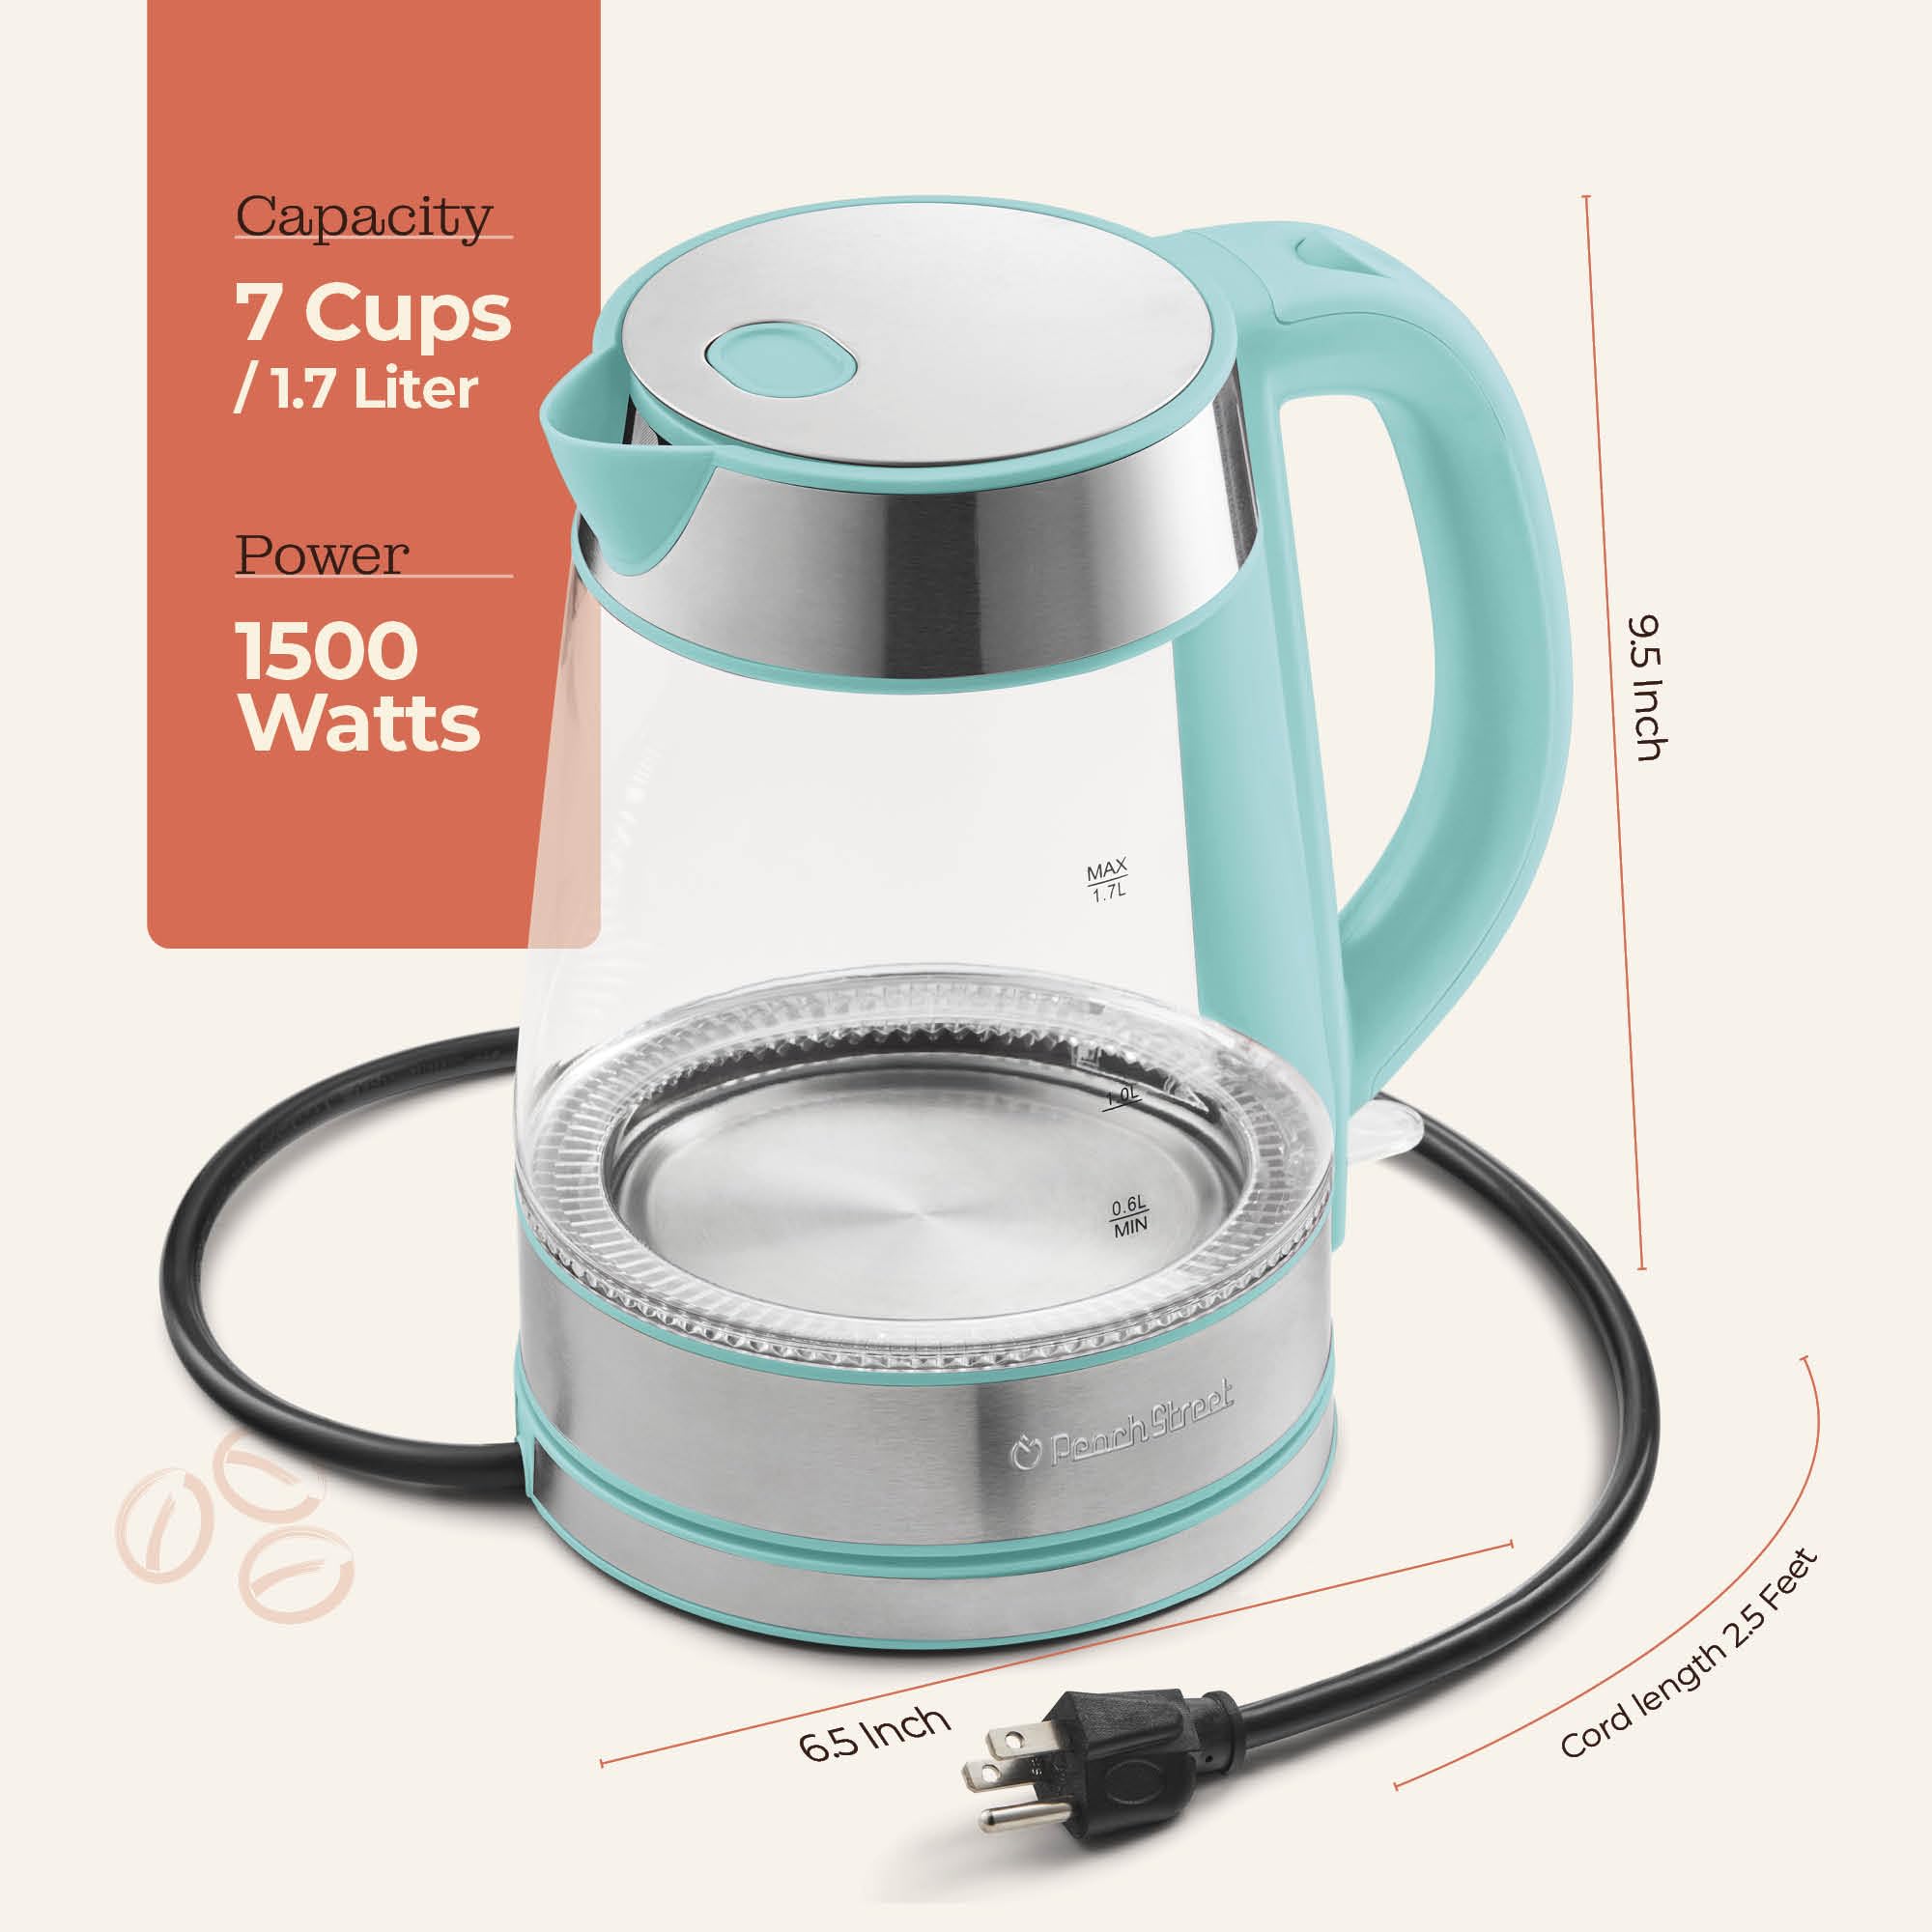 Speed-Boil Electric Kettle - 1.7L Water Boiler 1500W, Coffee & Tea Kettle Borosilicate Glass, Easy Clean Wide Opening, Auto Shut-Off, Cool Touch Handle, LED Light. 360° Rotation  - Good